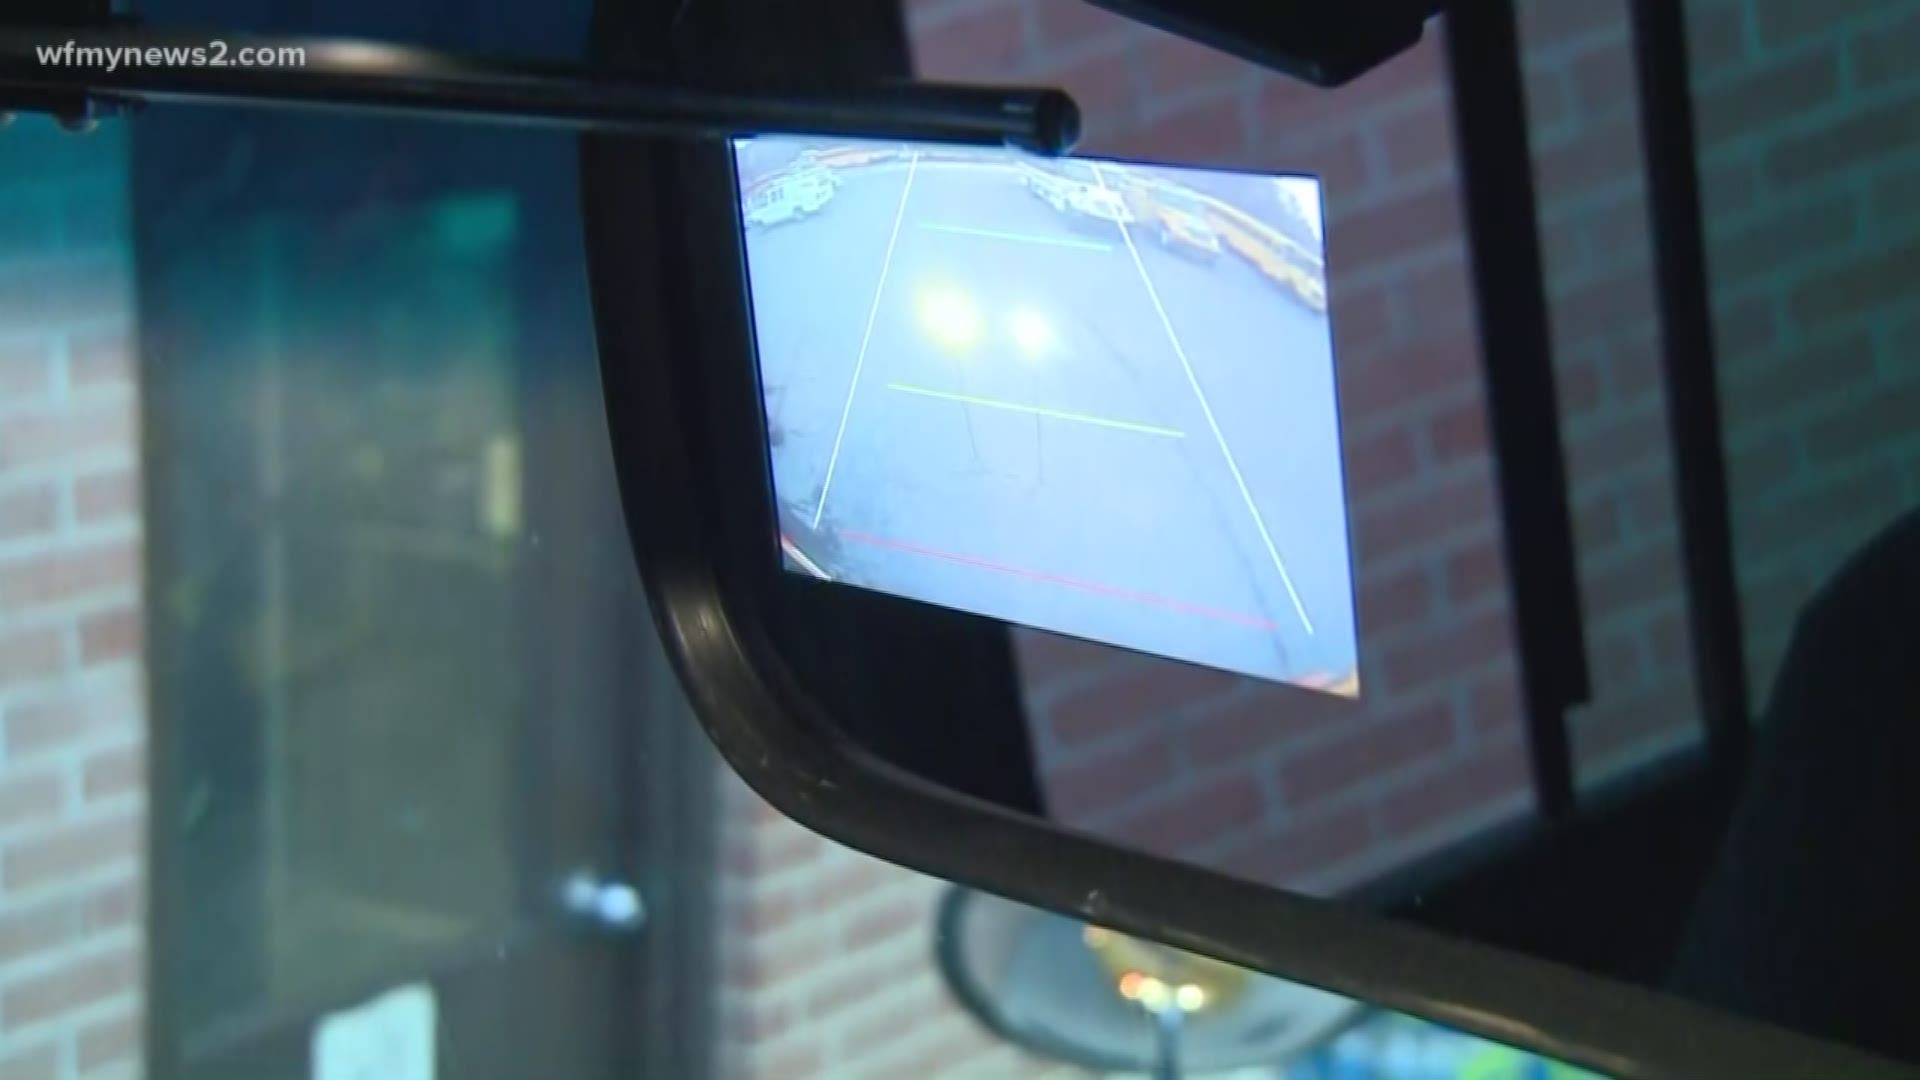 New Backup Cameras On Forsyth County Buses